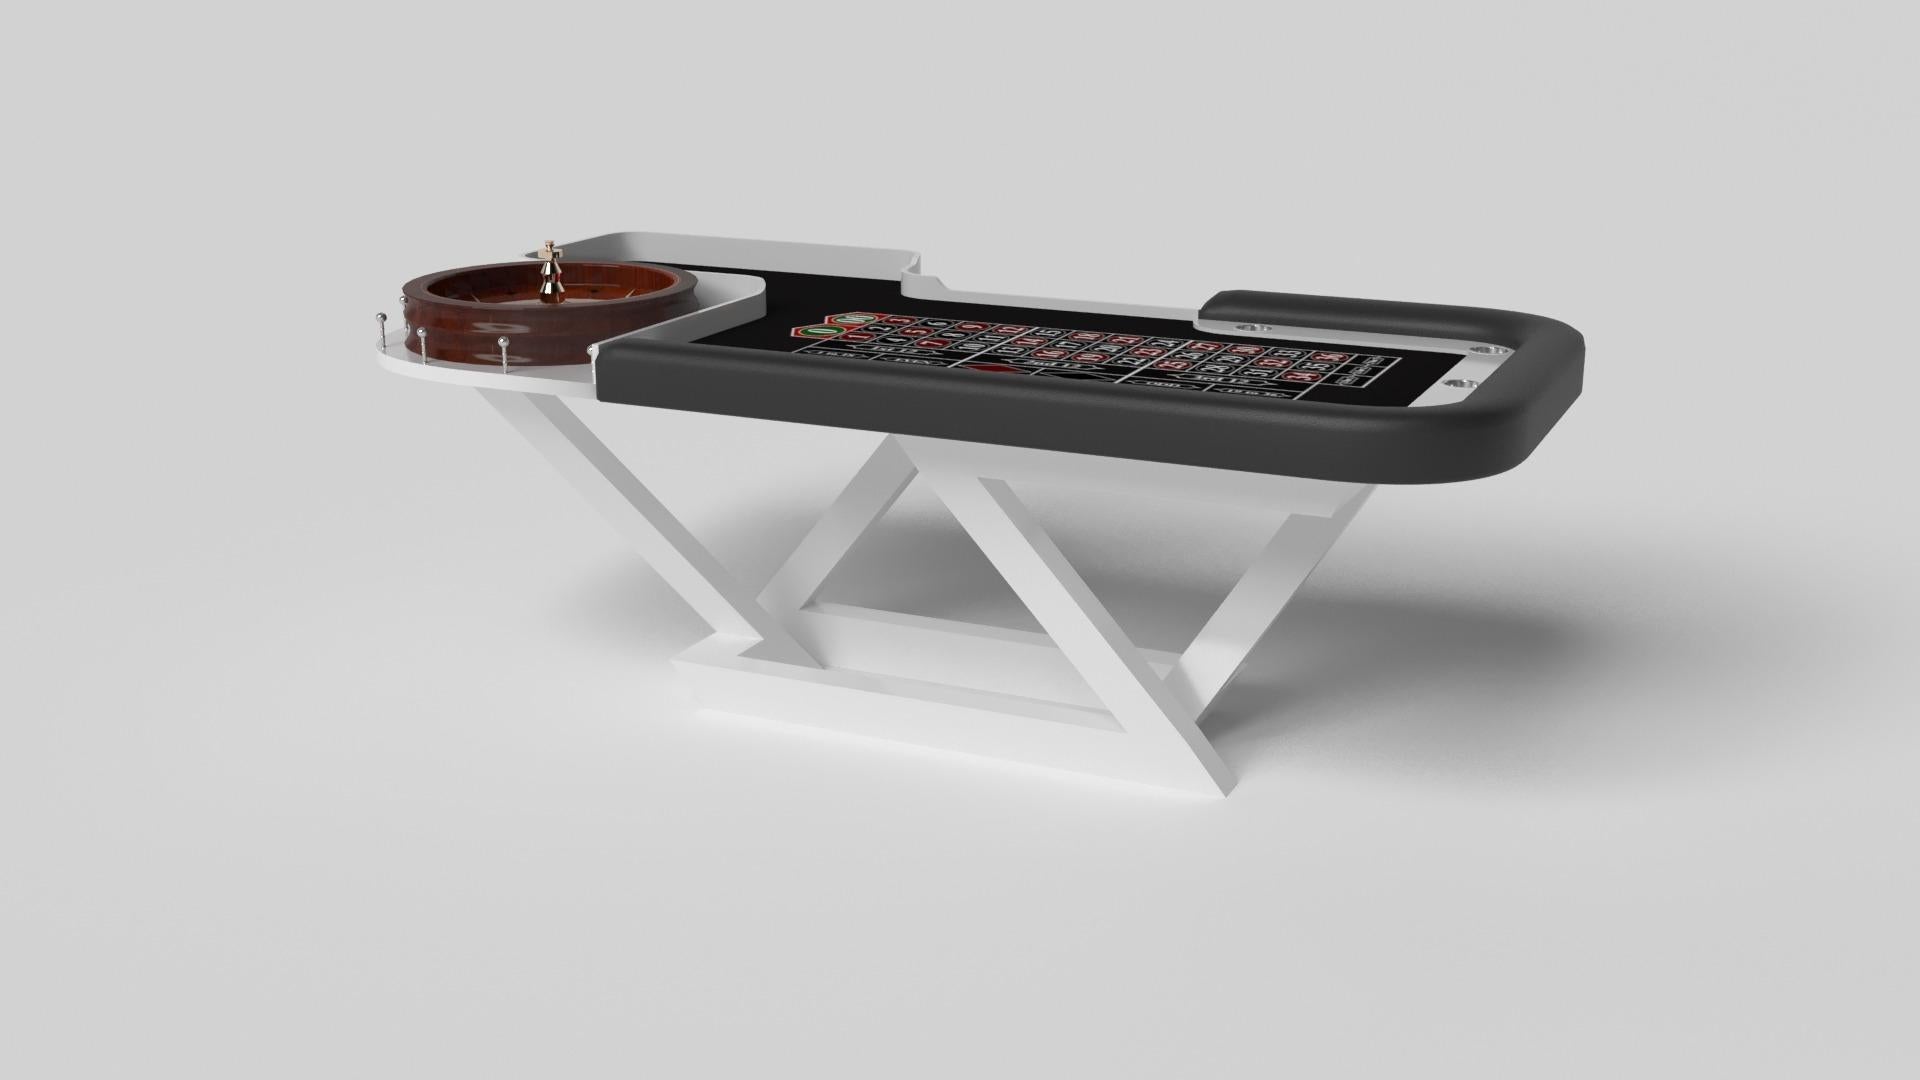 A contemporary composition of clean lines and sleek edges, the Trinity roulette table in black with red is an elegant expression of modern design. Handcrafted in a rectangular design with a classic roulette wheel and bet boxes, this table offers